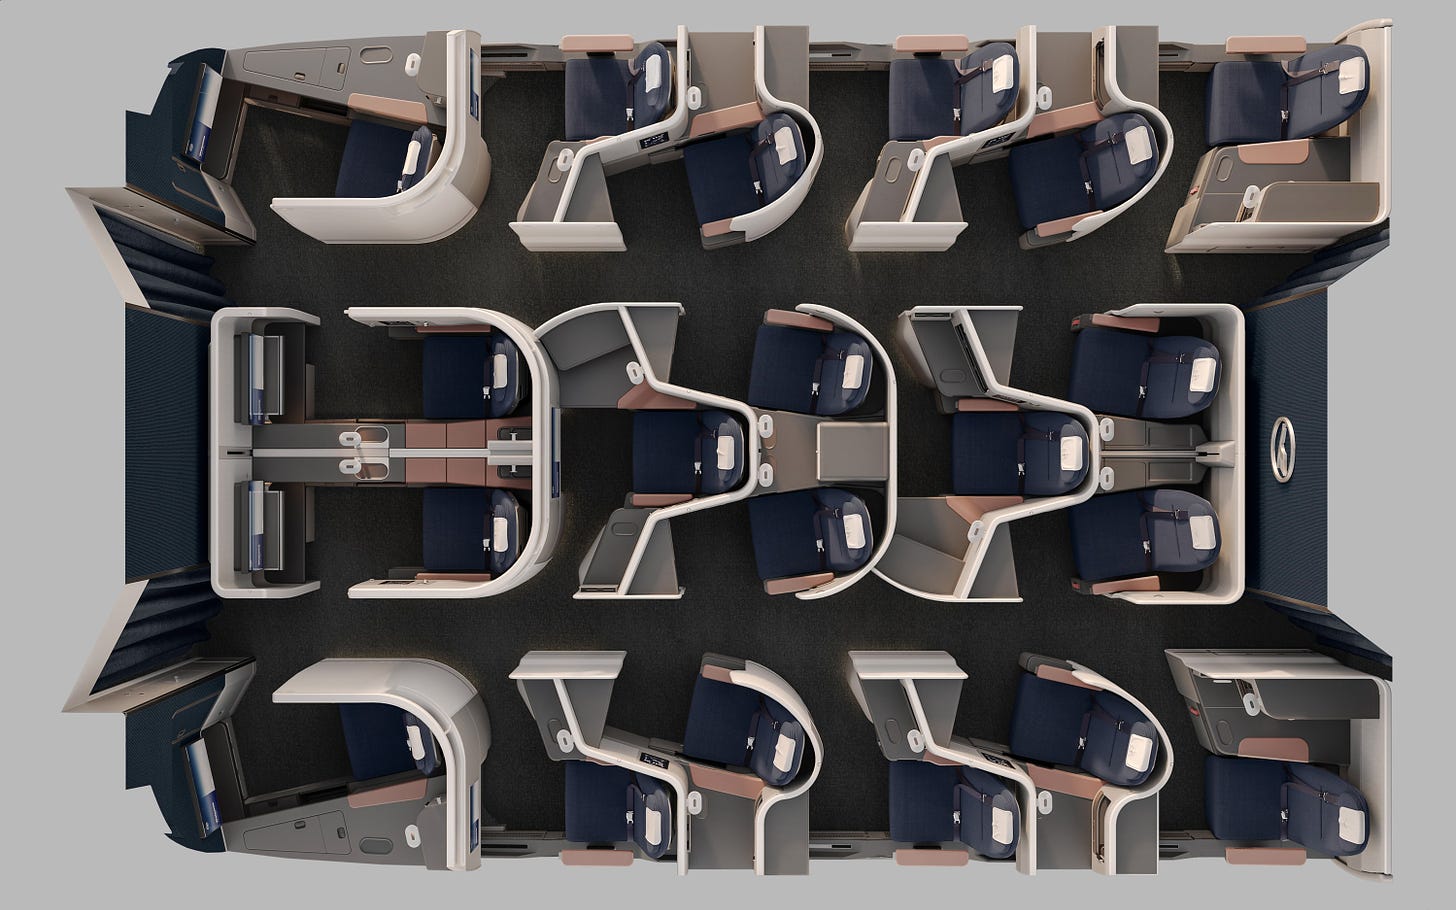 Lufthansa Allegris Business Class layout with seven seat variants